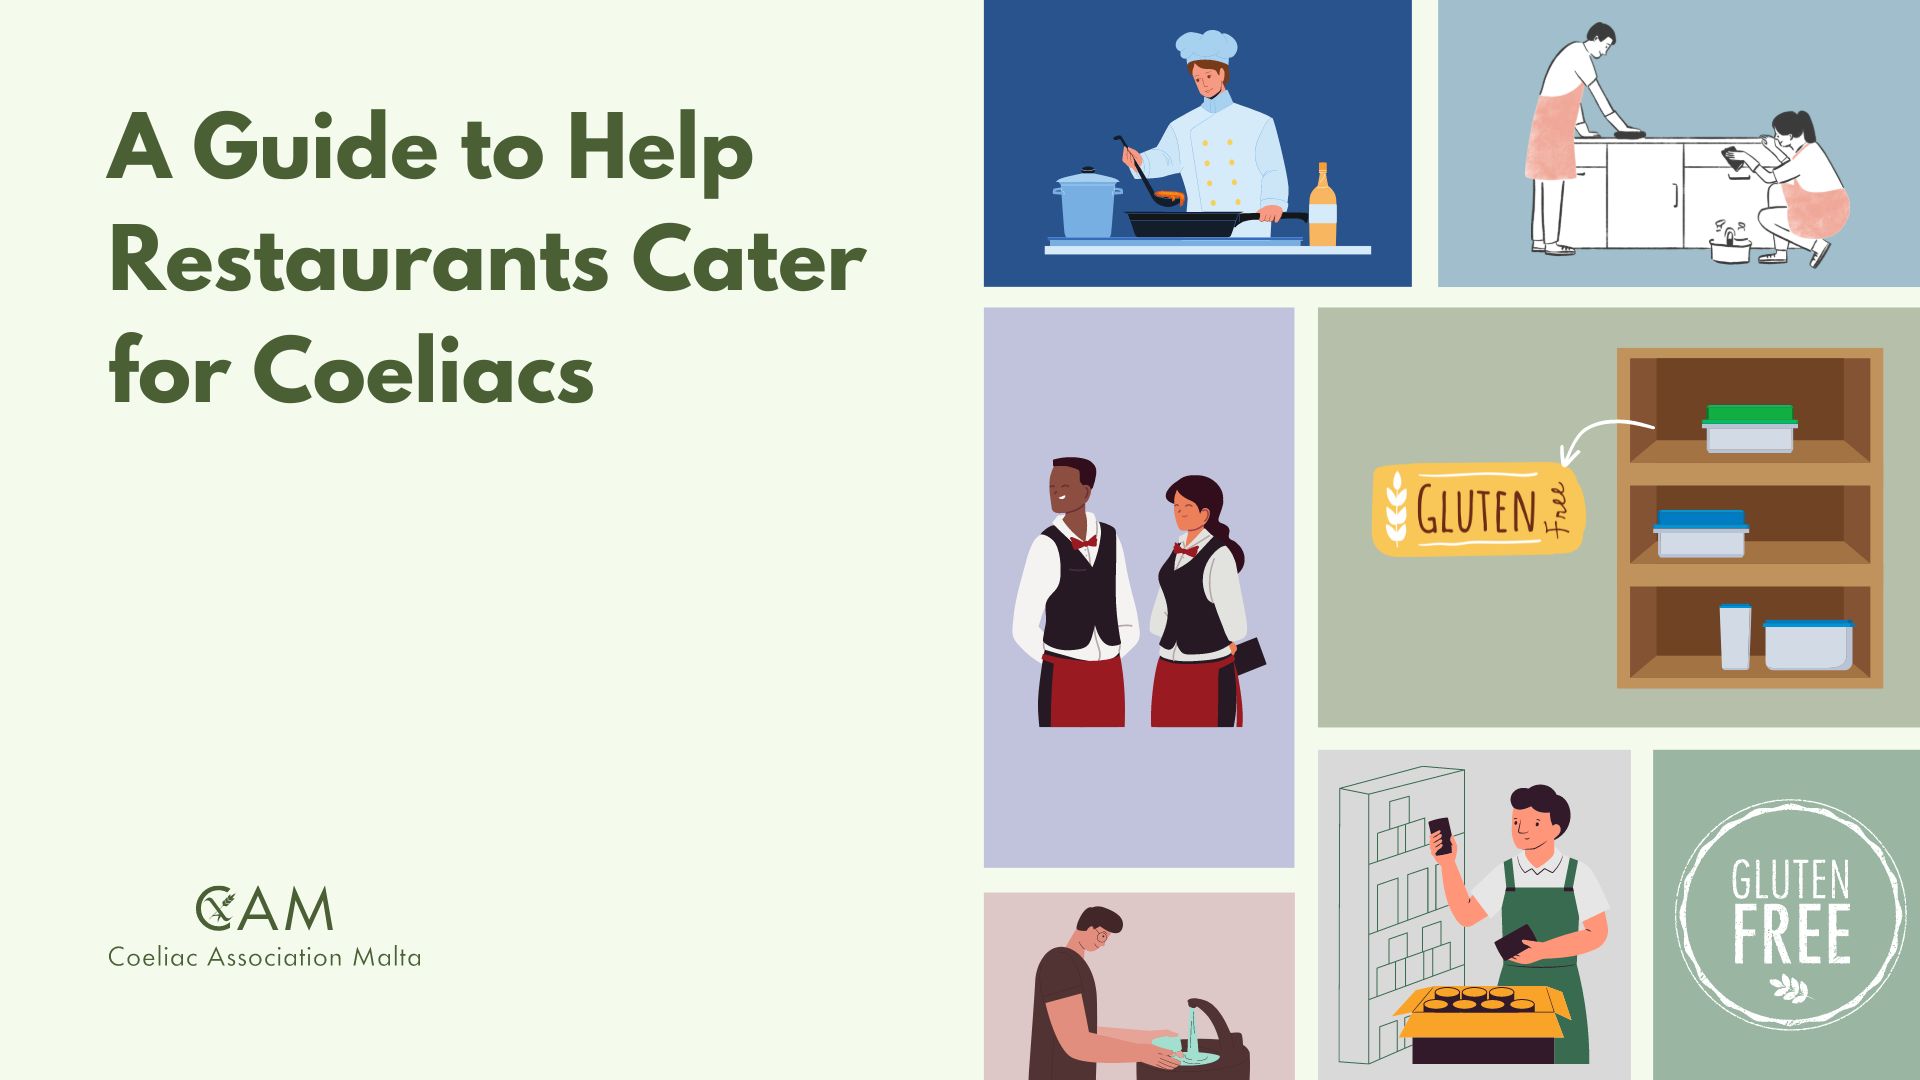 A Guide to Help Restaurants Cater for Coeliacs